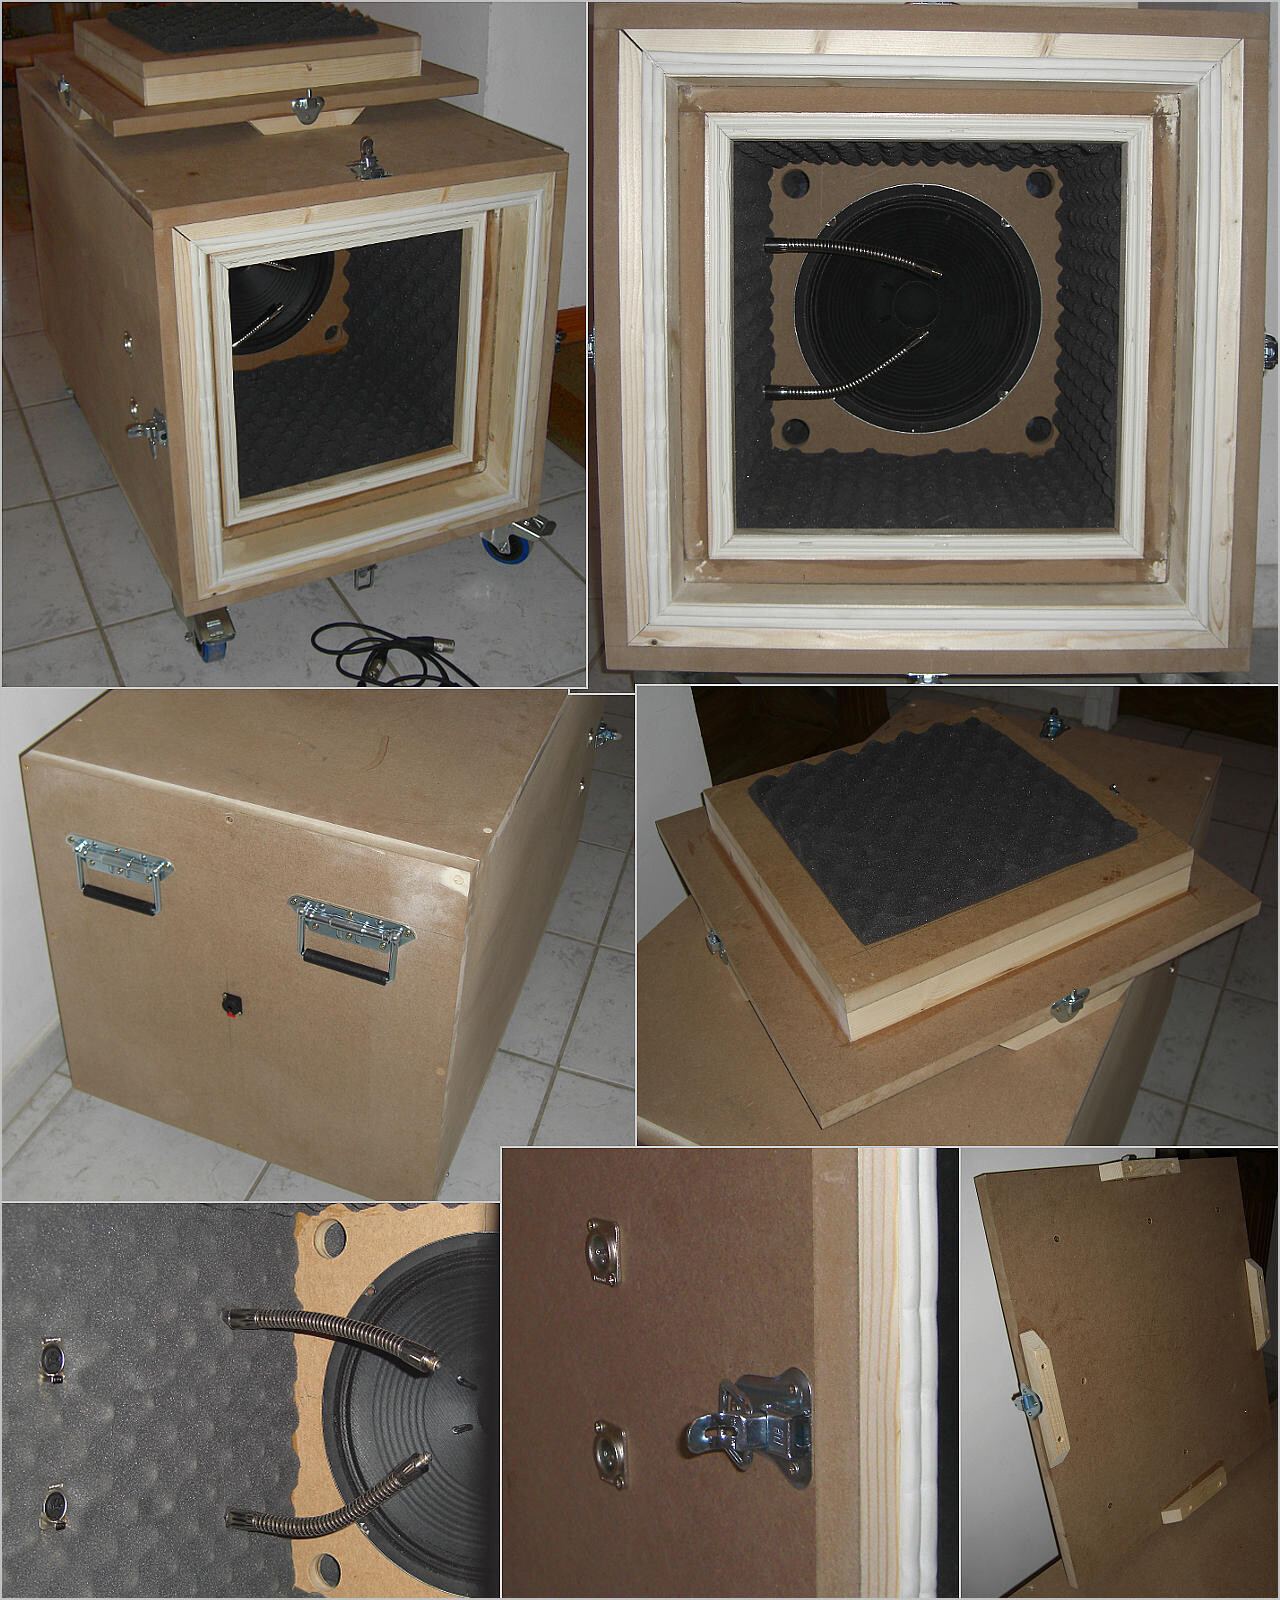 Isolation cab, different views / angles.